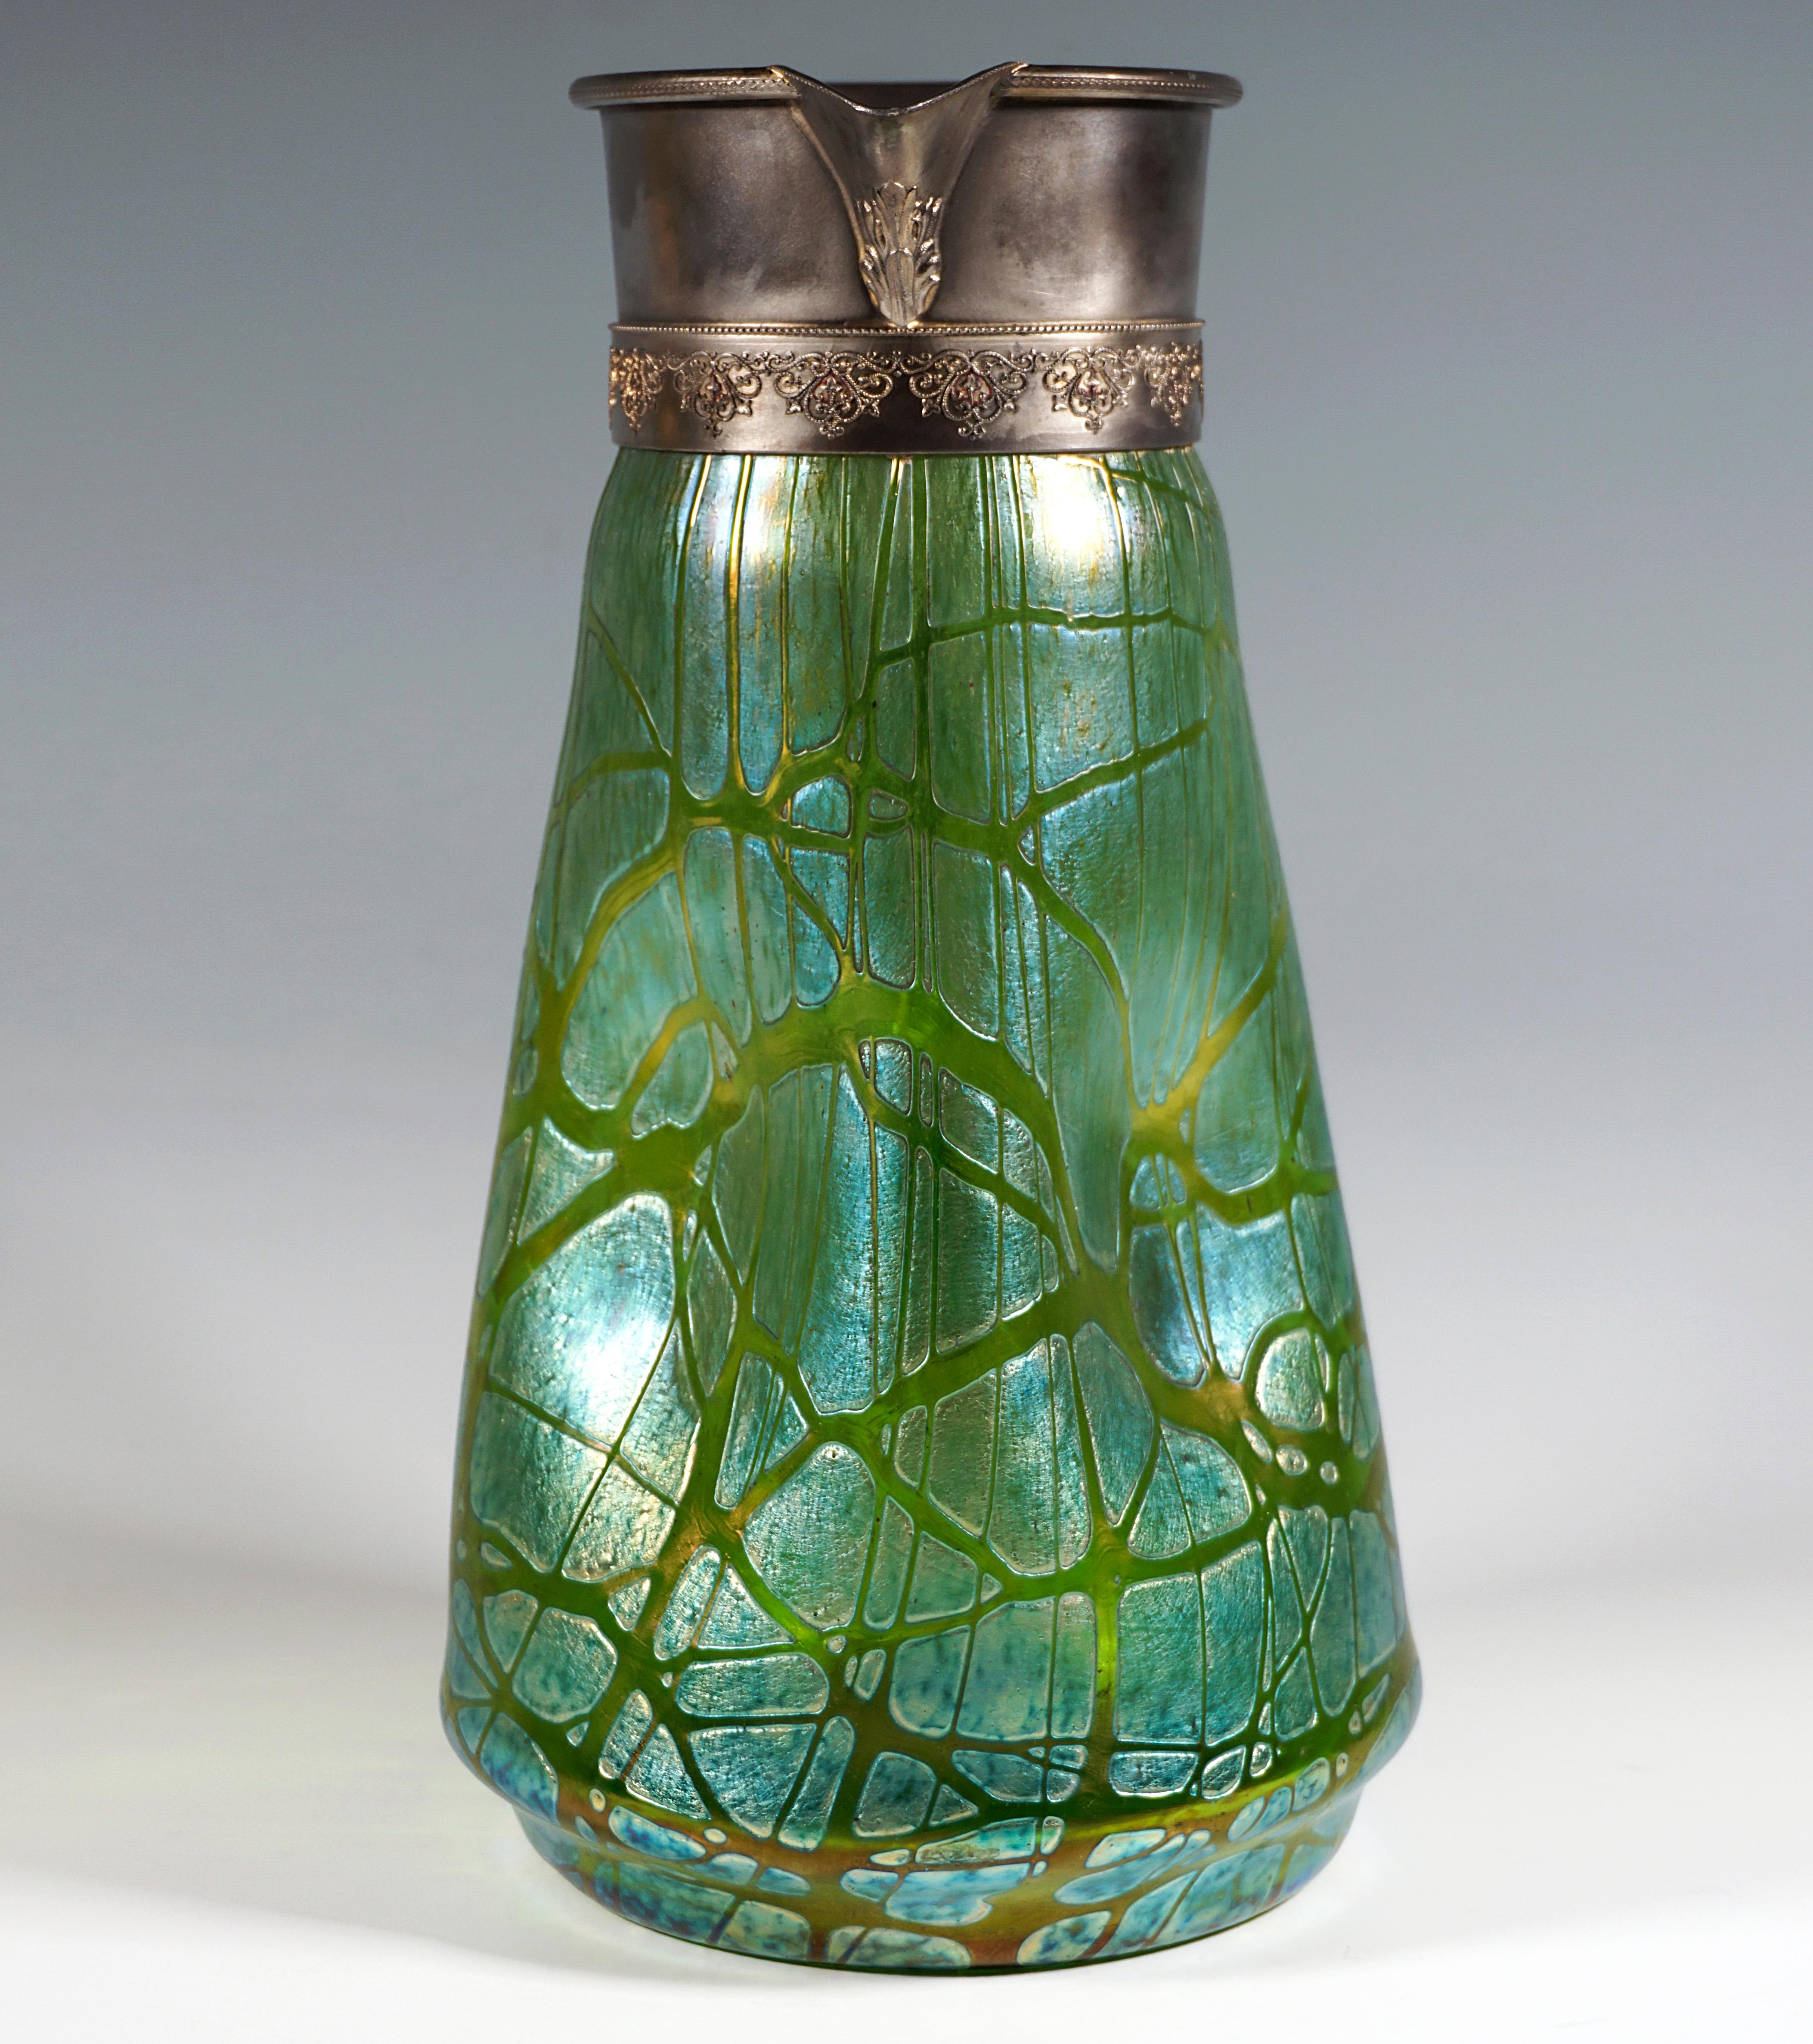 Exceptional Bohemian Art Nouveau Glass Jug:
Mould-blown, conical glass vessel on a recessed, flush stand, the wall moulded in four places, applied handle, wide opening with high original pewter mount with relief decoration and spout.

Shape: Pattern